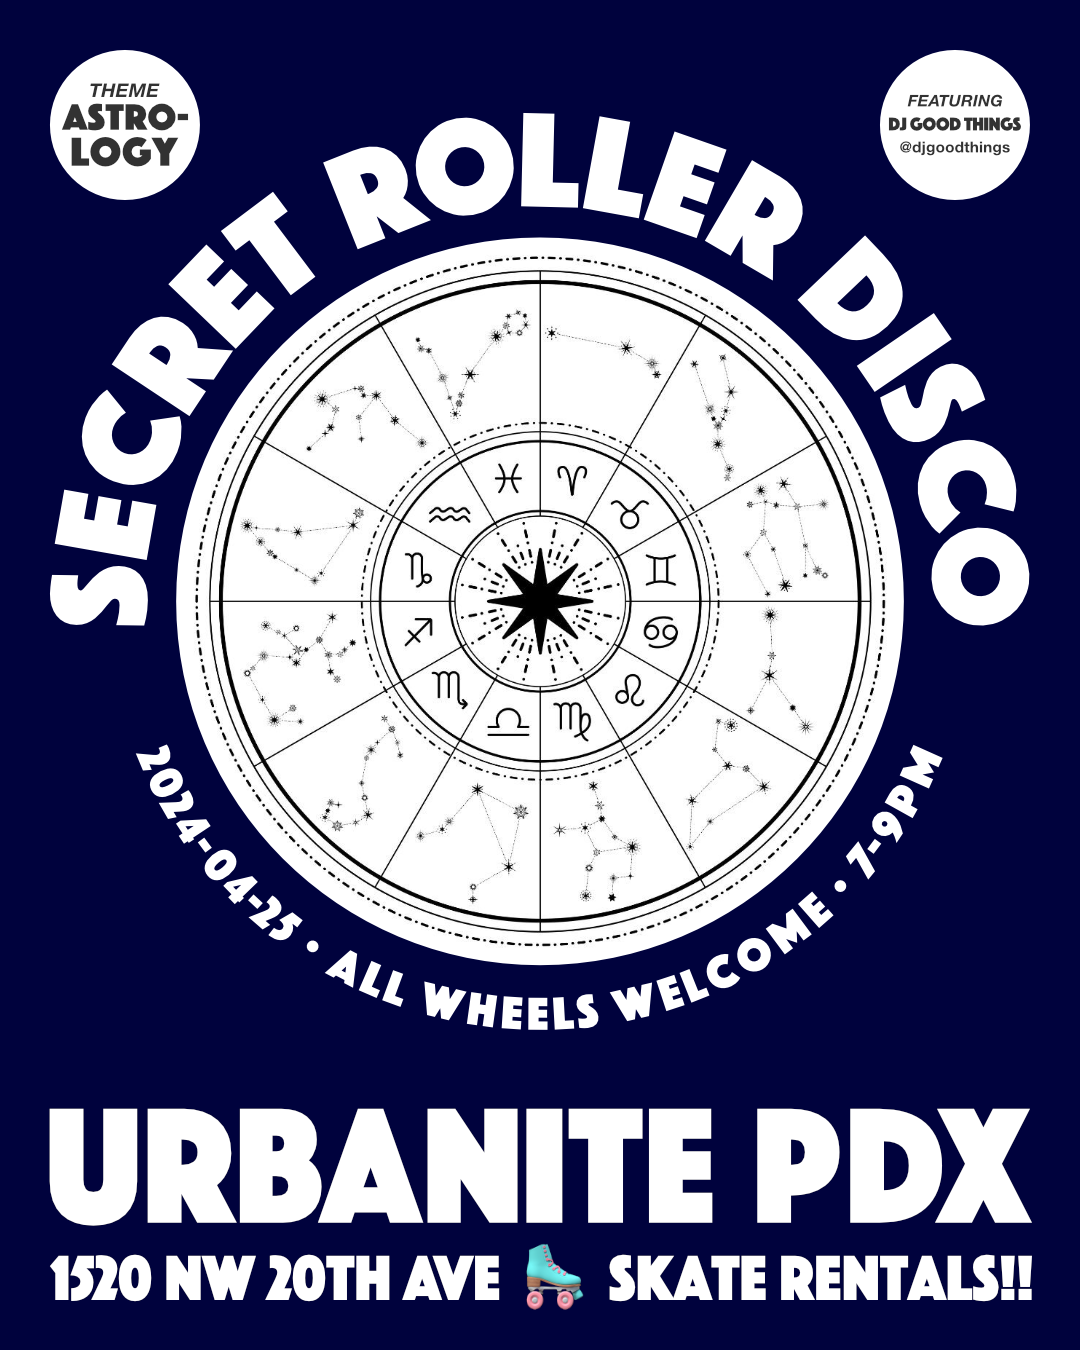 
        Flyer for Secret Roller Disco:
        Thursday, April 25, 2024, 7 to 9pm.
        URBANITE PDX.  1520 NW 20th Ave. All wheels welcome.
        Skate Rentals!
      